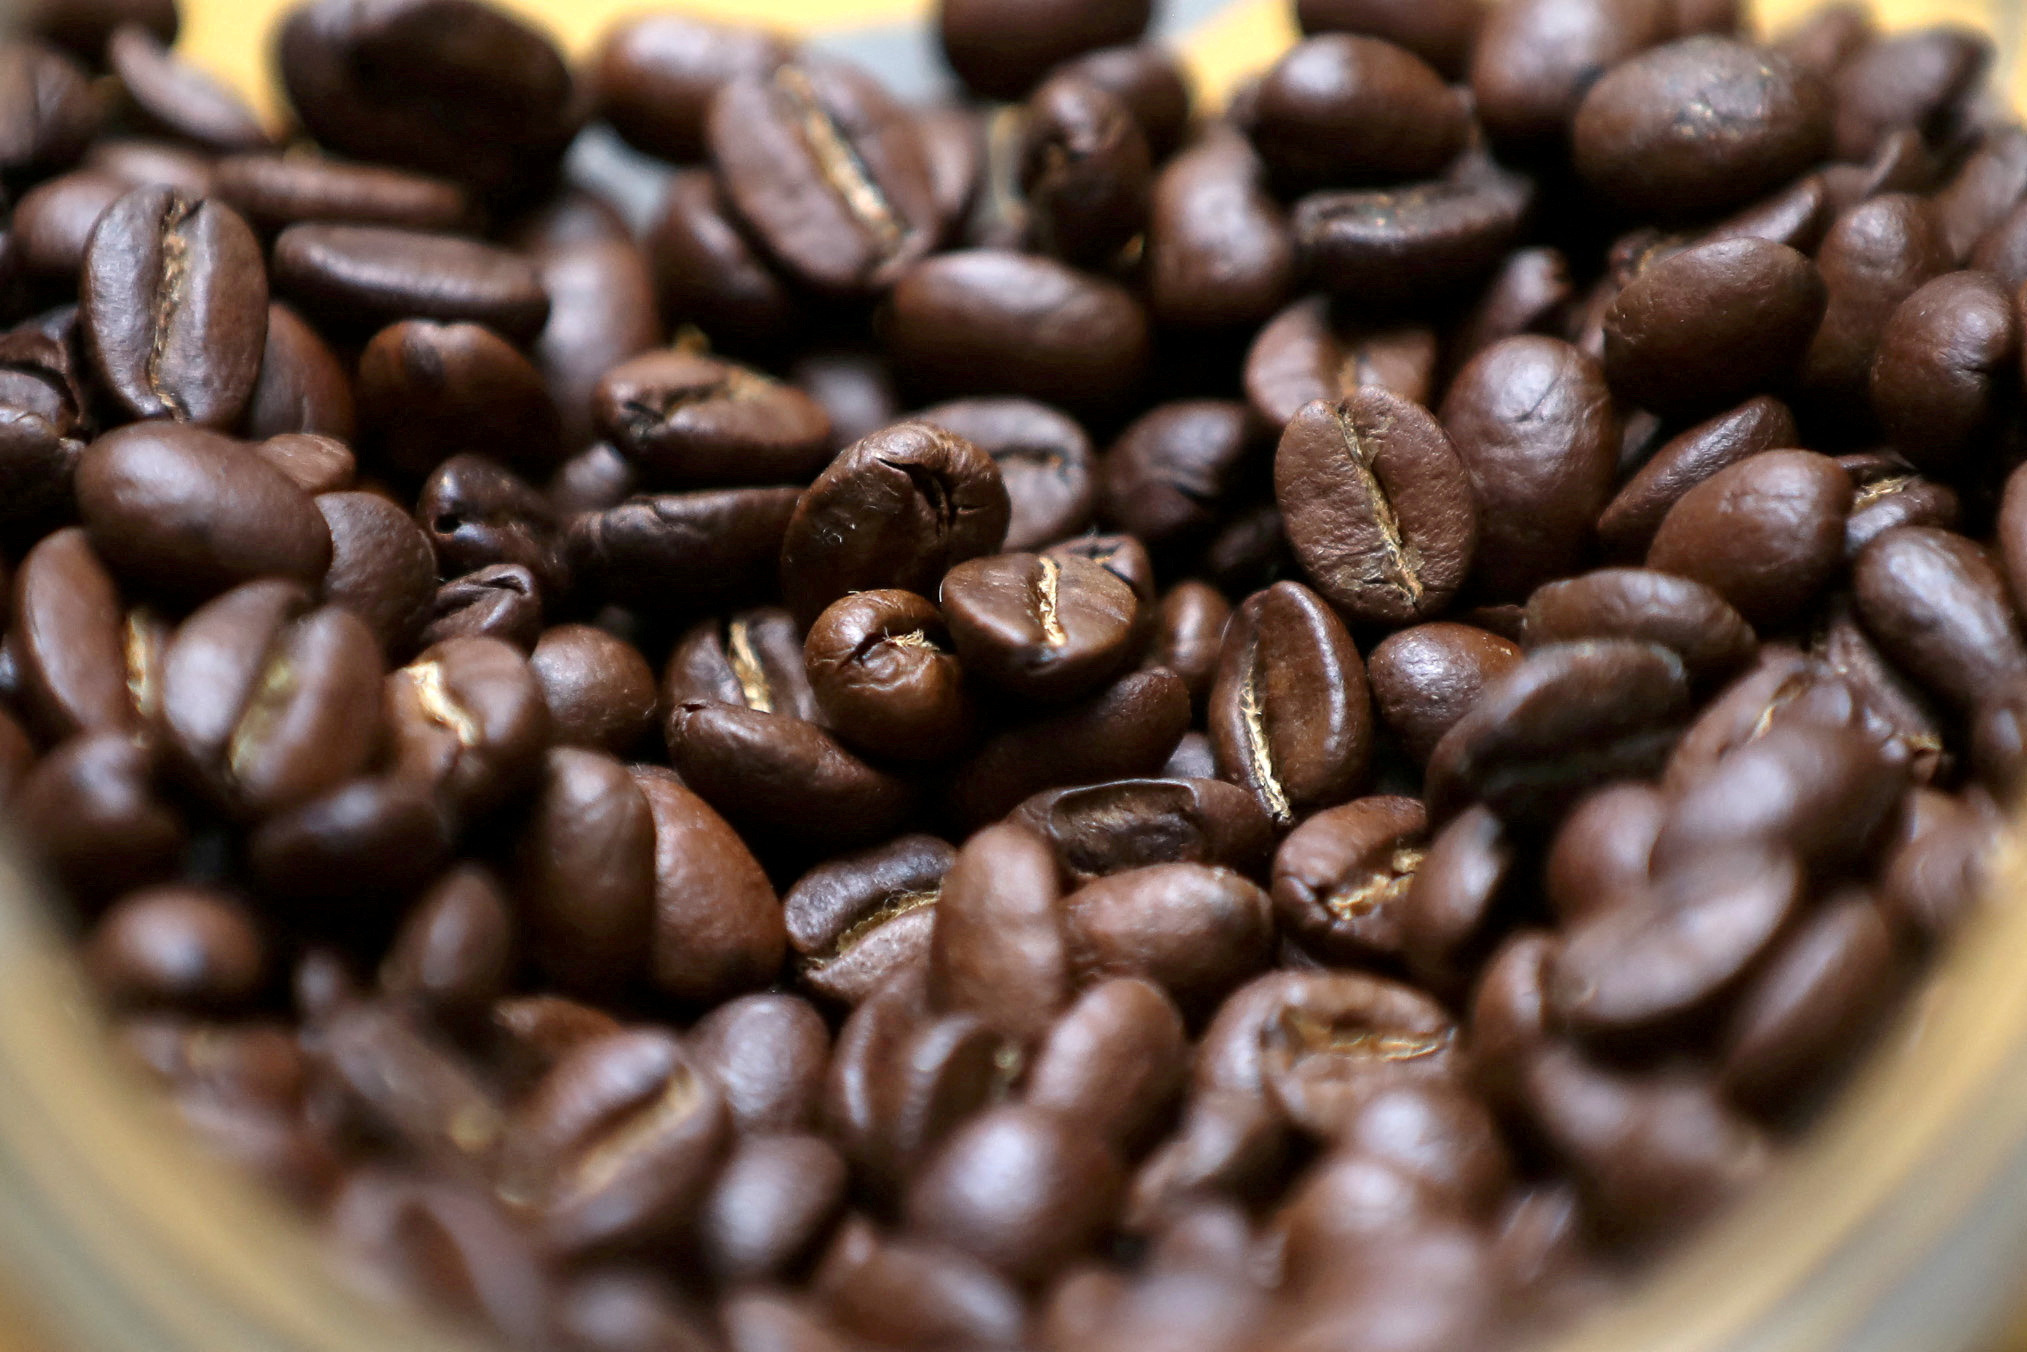 Roasted coffee beans are seen on display at a Juan Valdez store in Bogota